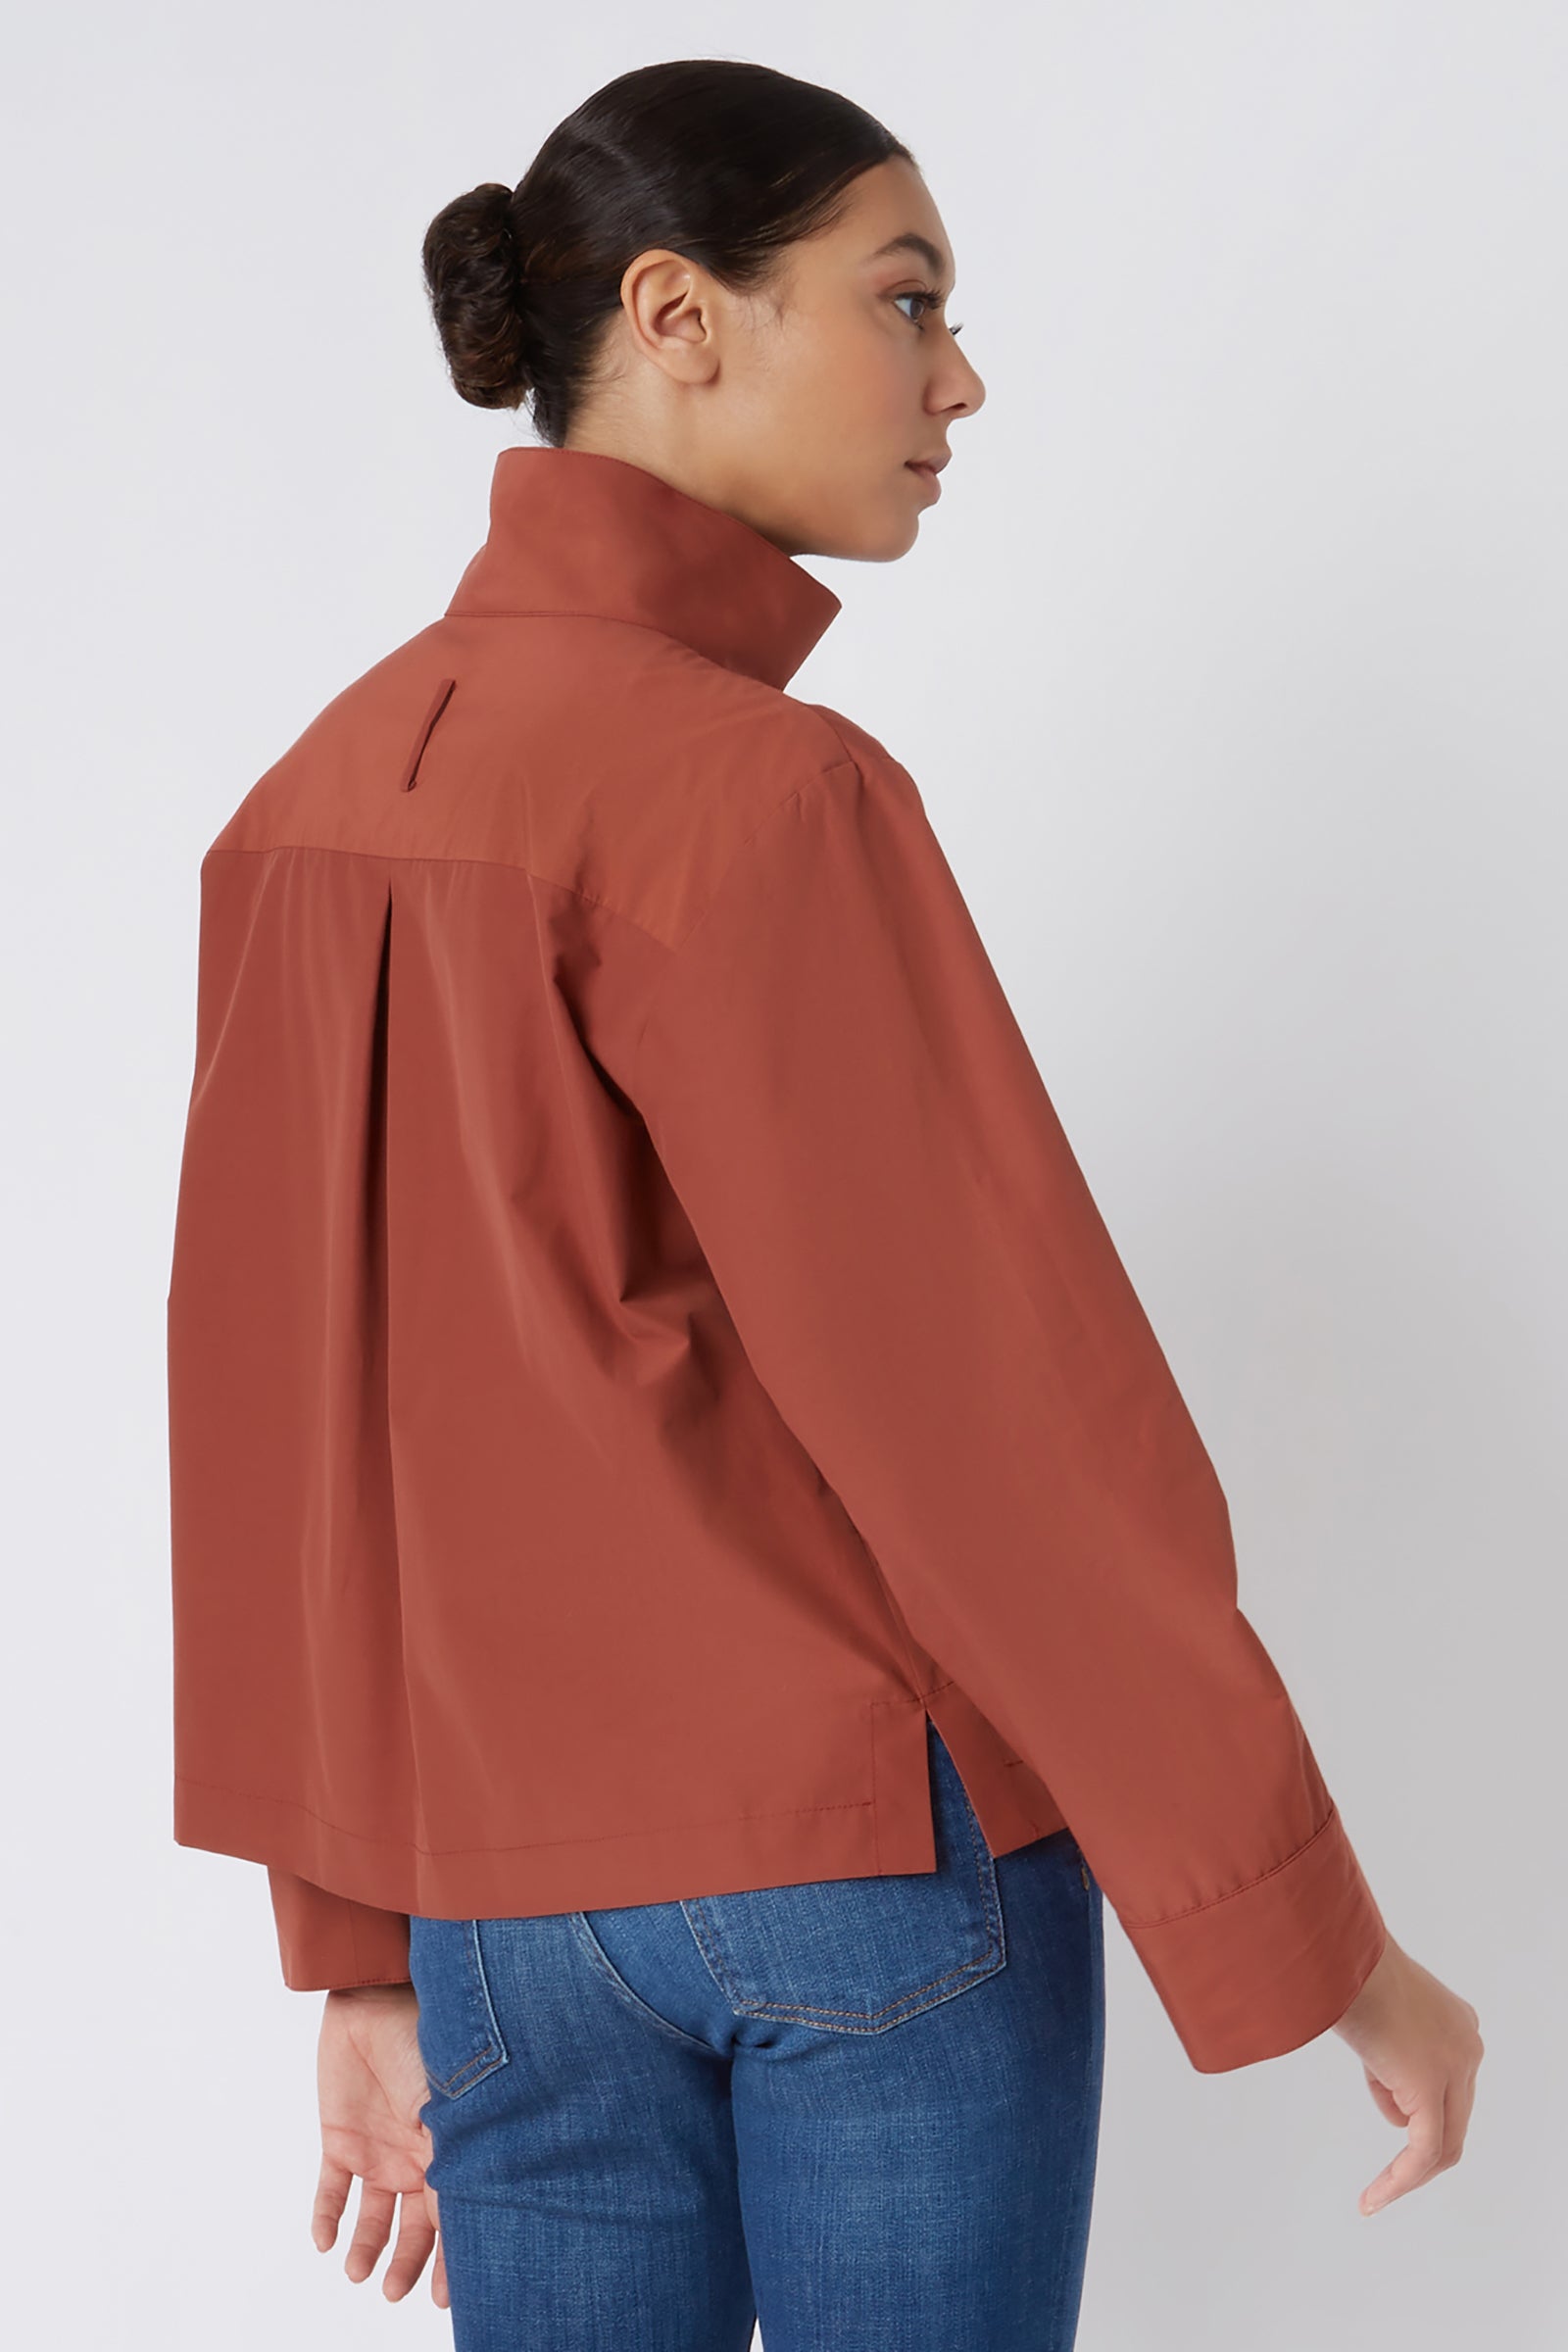 Kal Rieman Peggy Collared Shirt in Rust Broadcloth on Model Cropped Back View